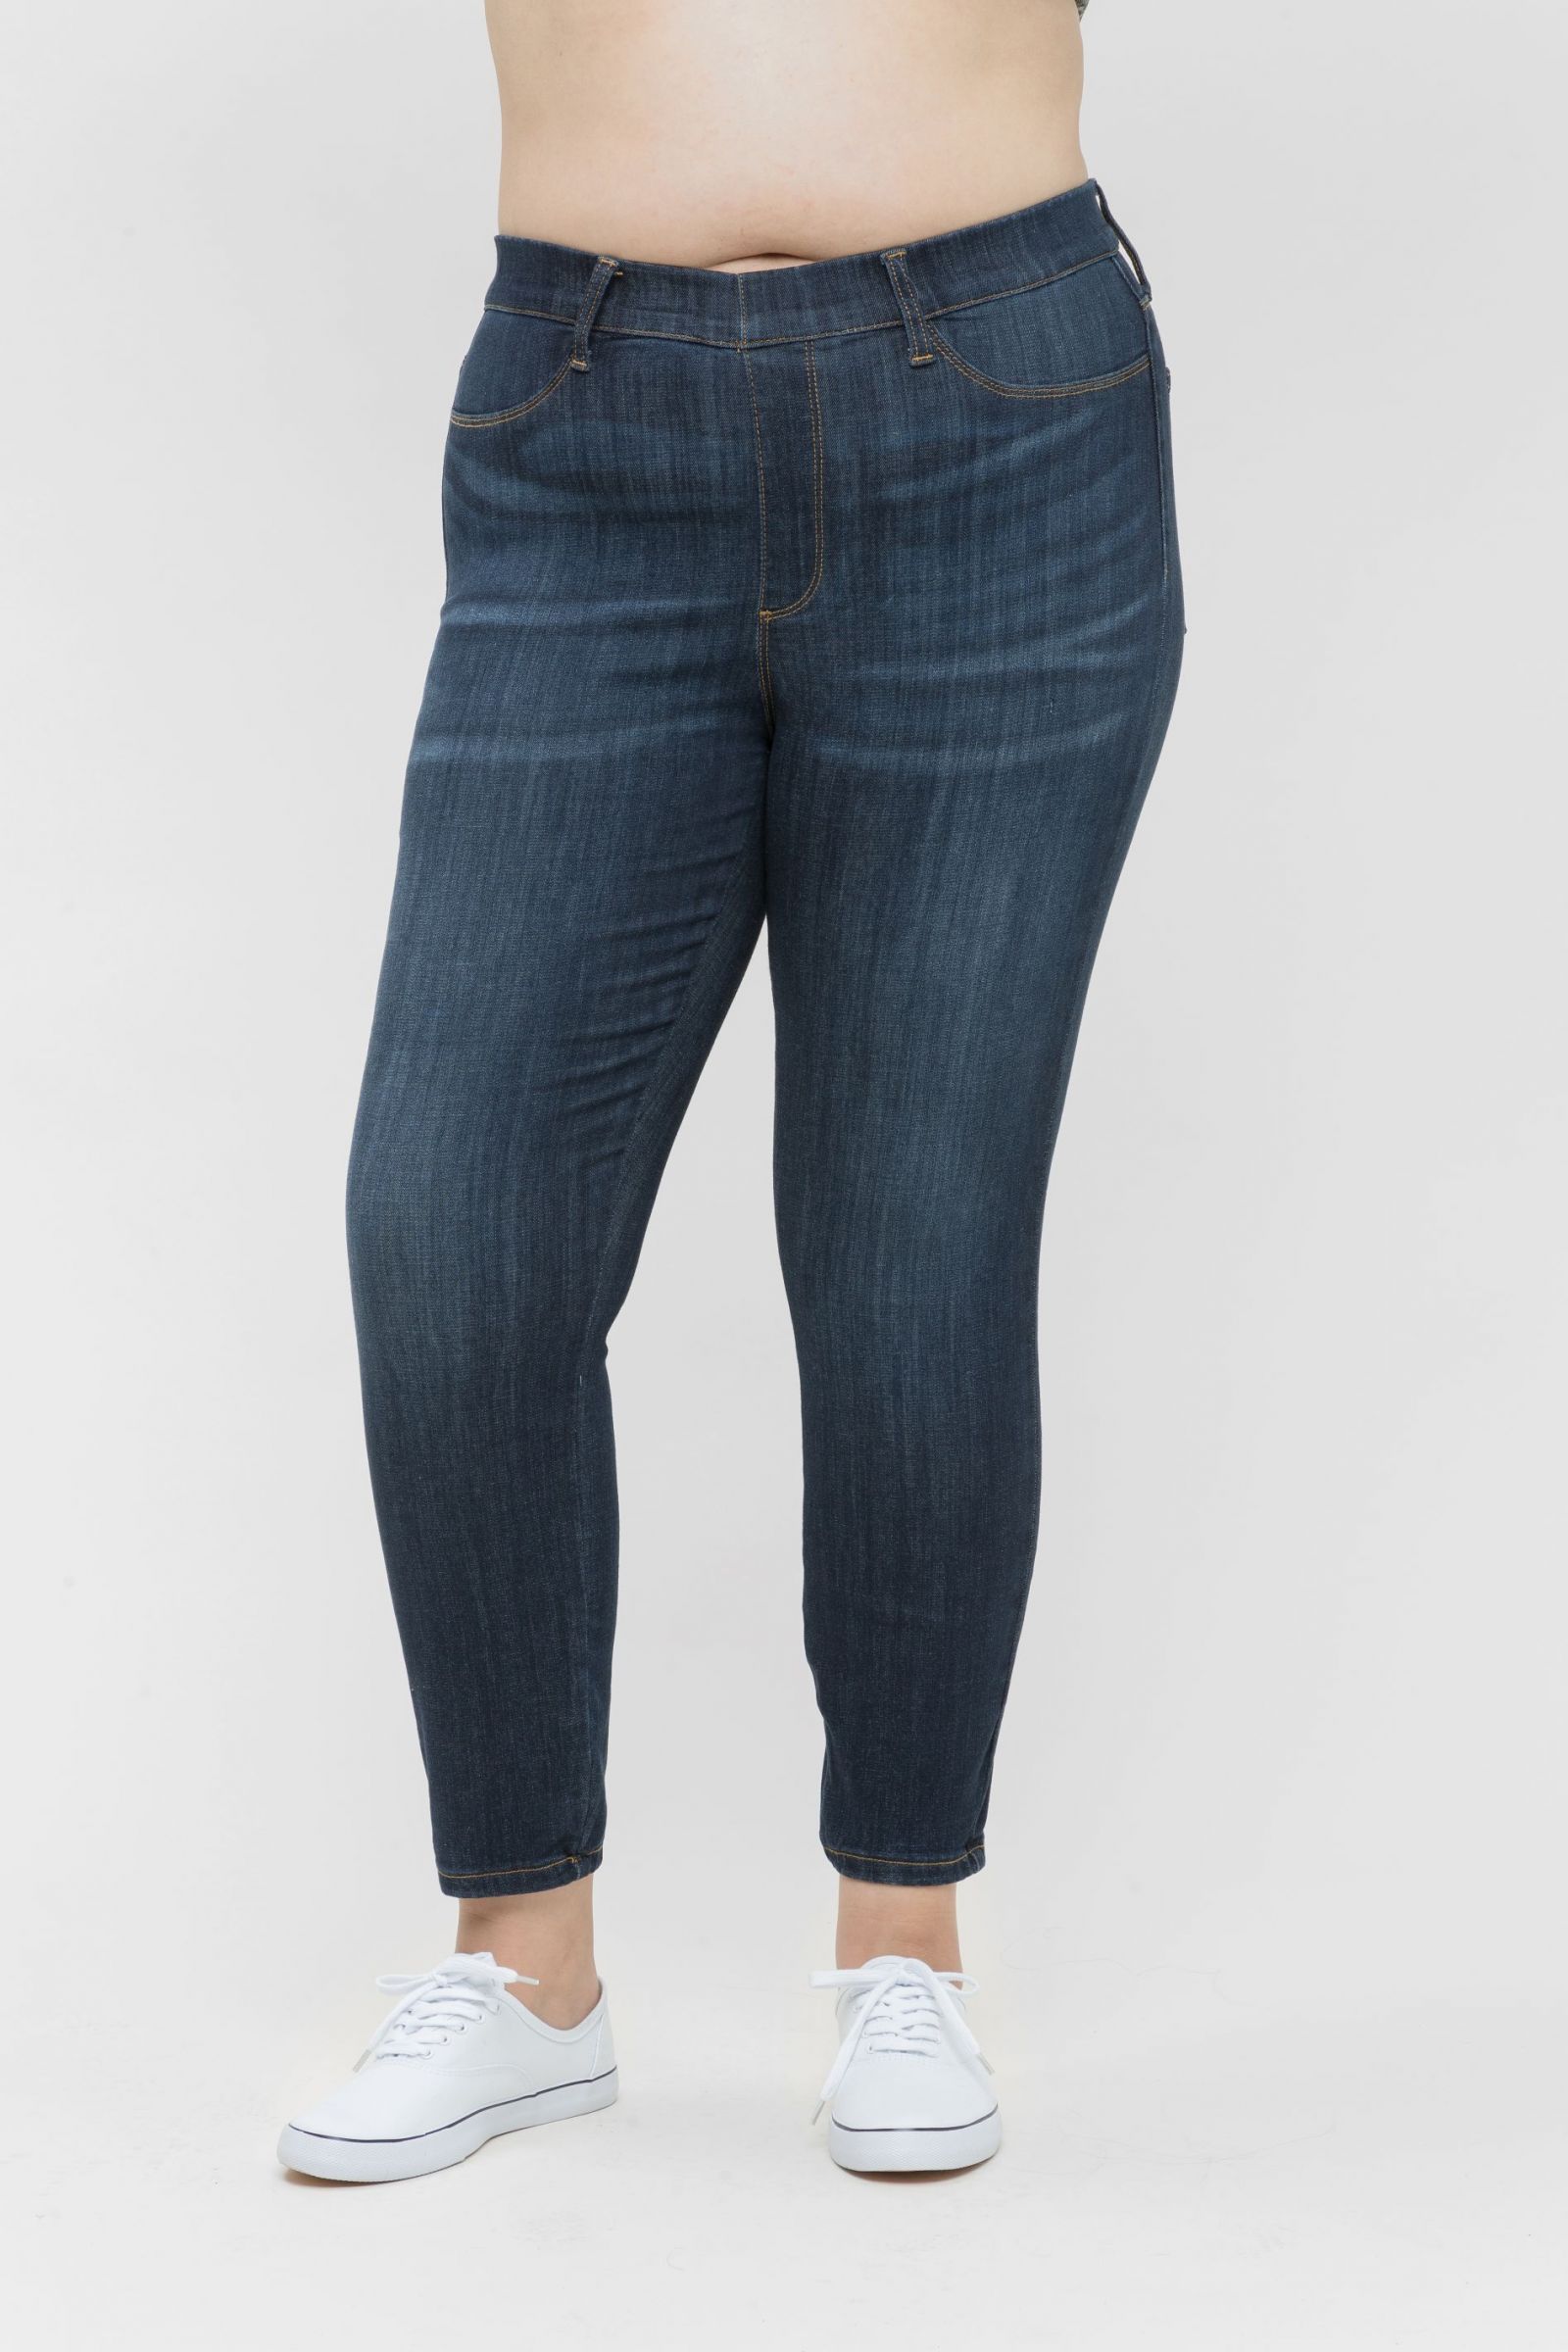 Judy Blue Jeggings – Beauty and the Beard Boutique